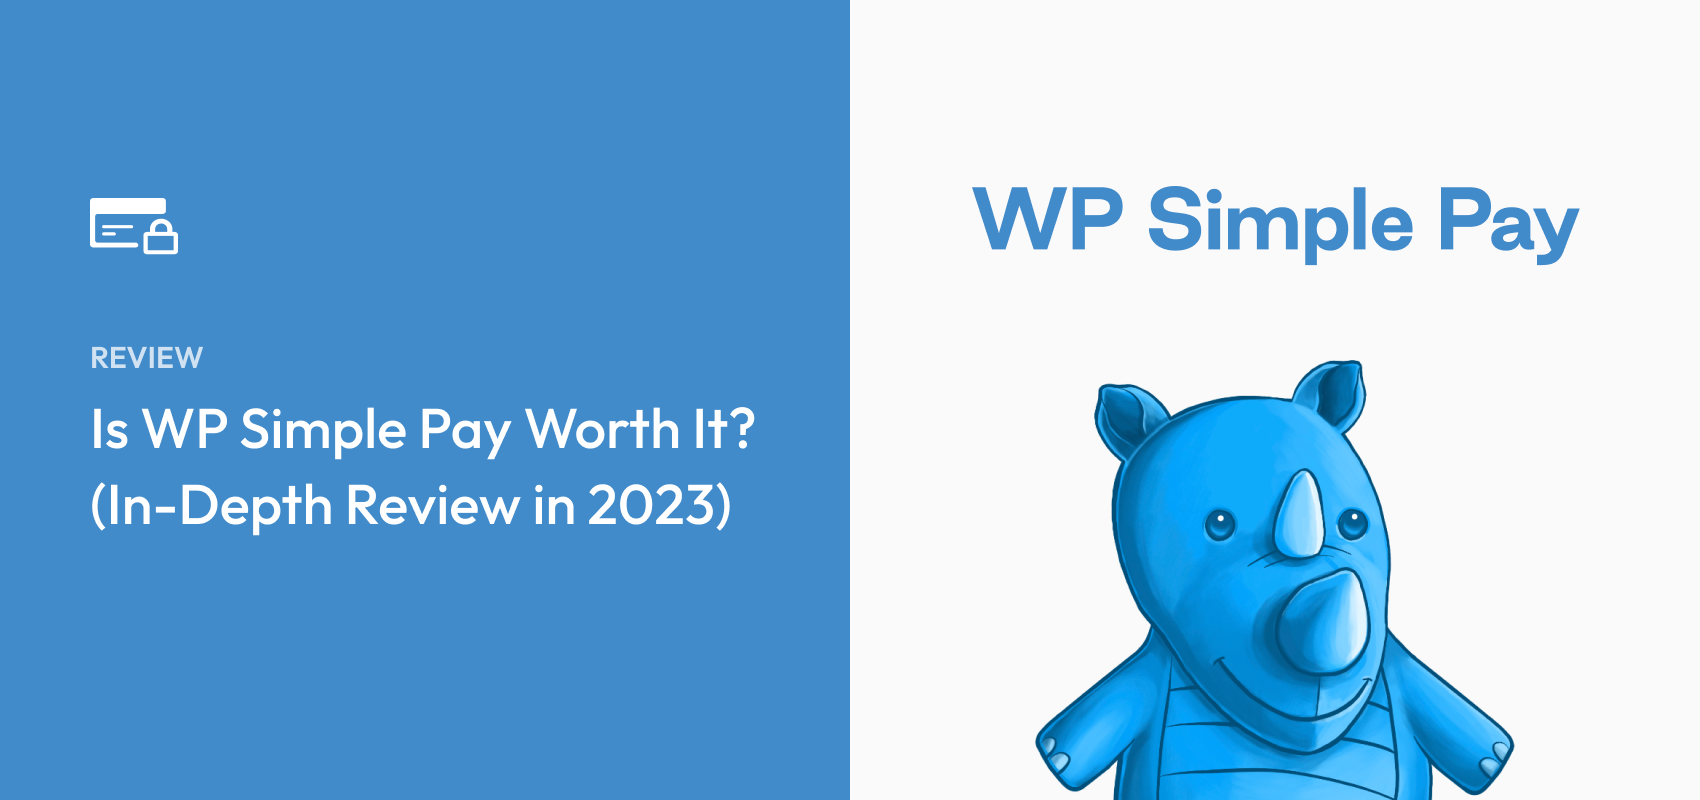 Is WP Simple Pay Worth It? (Review in 2023)